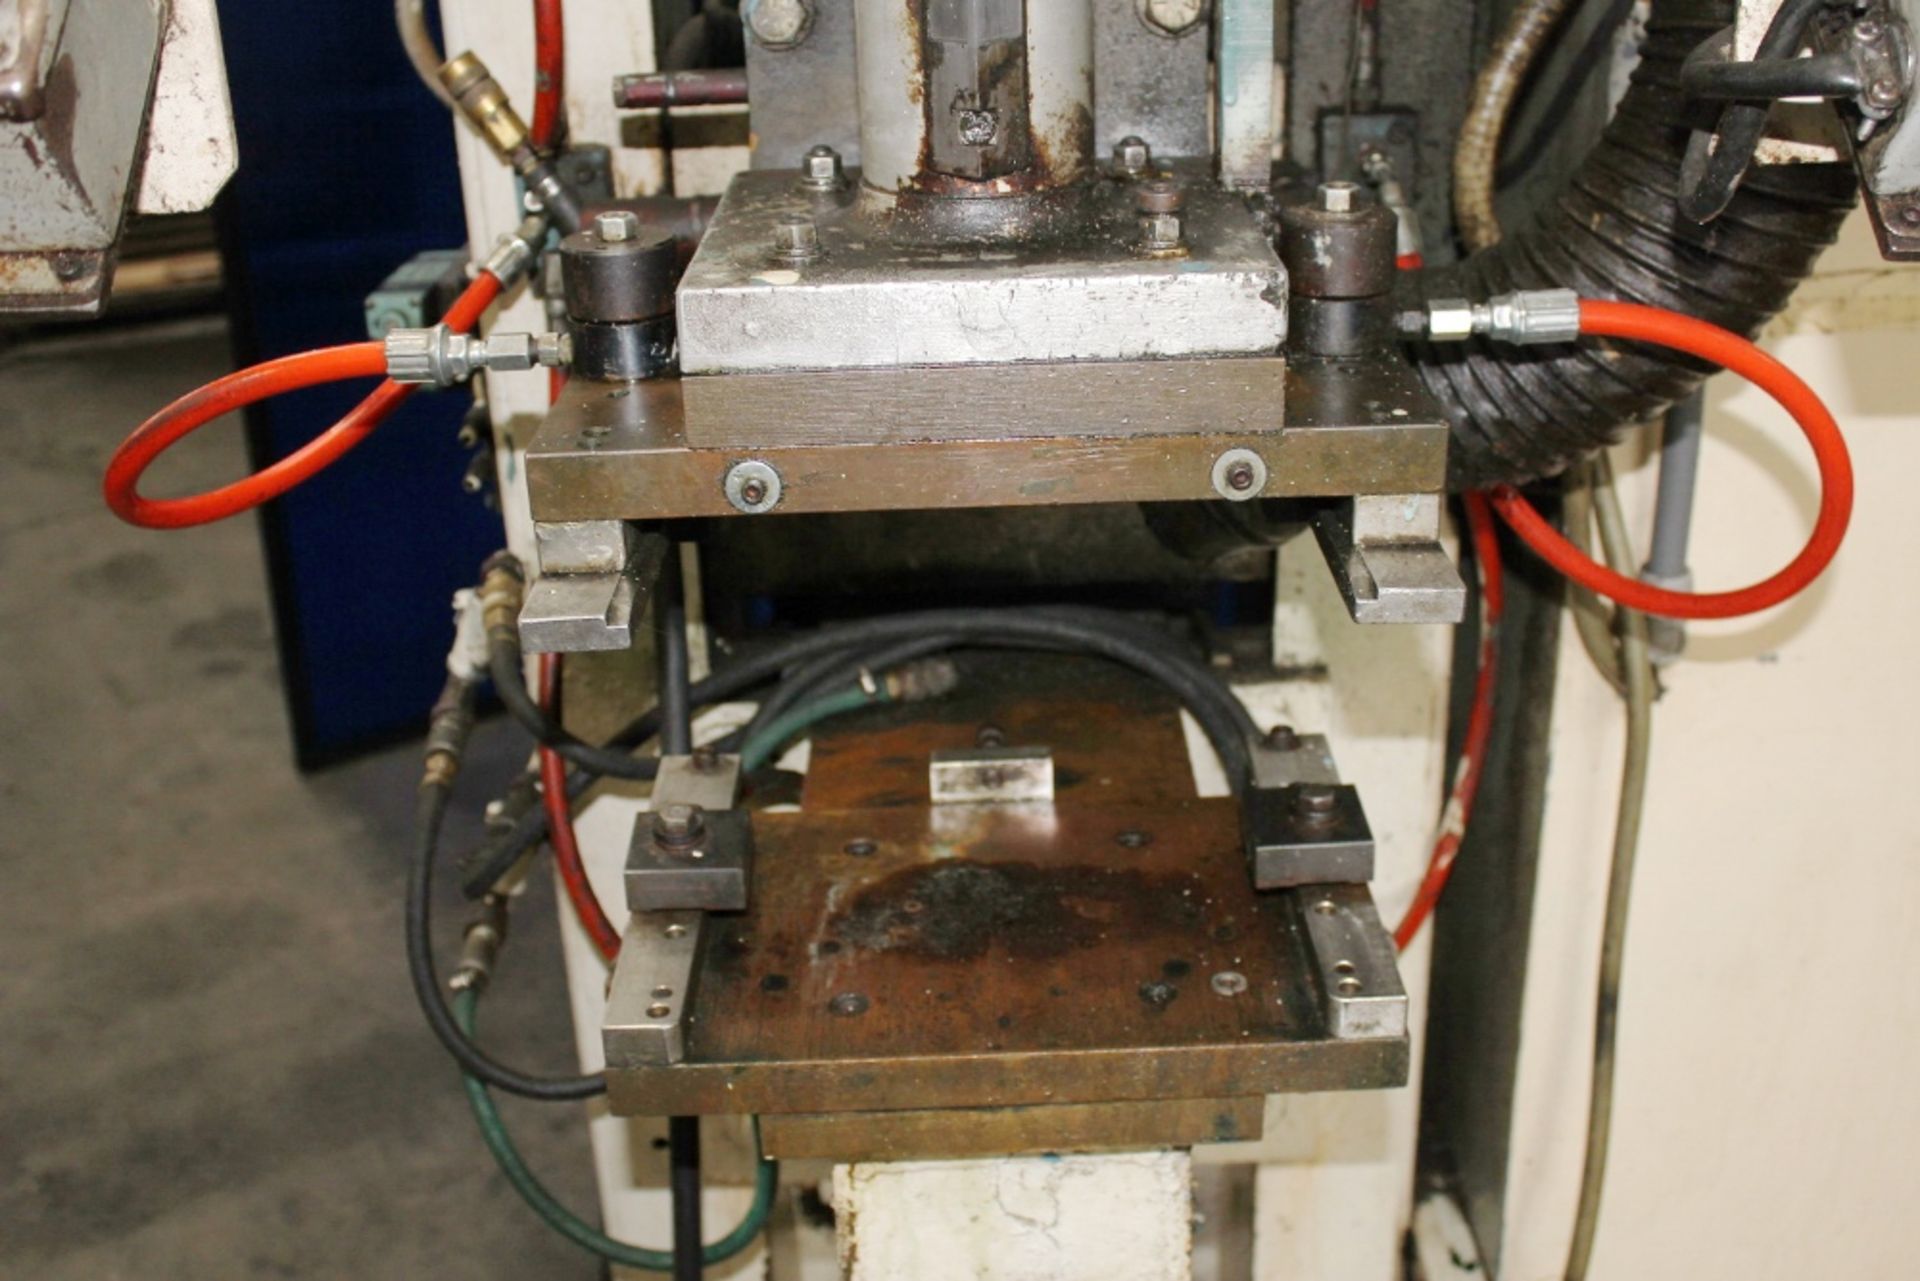 Hoffman Press Type Spot Welder 125 KVA x 14''. LOADING FEE FOR THIS LOT: $150 - Image 9 of 18